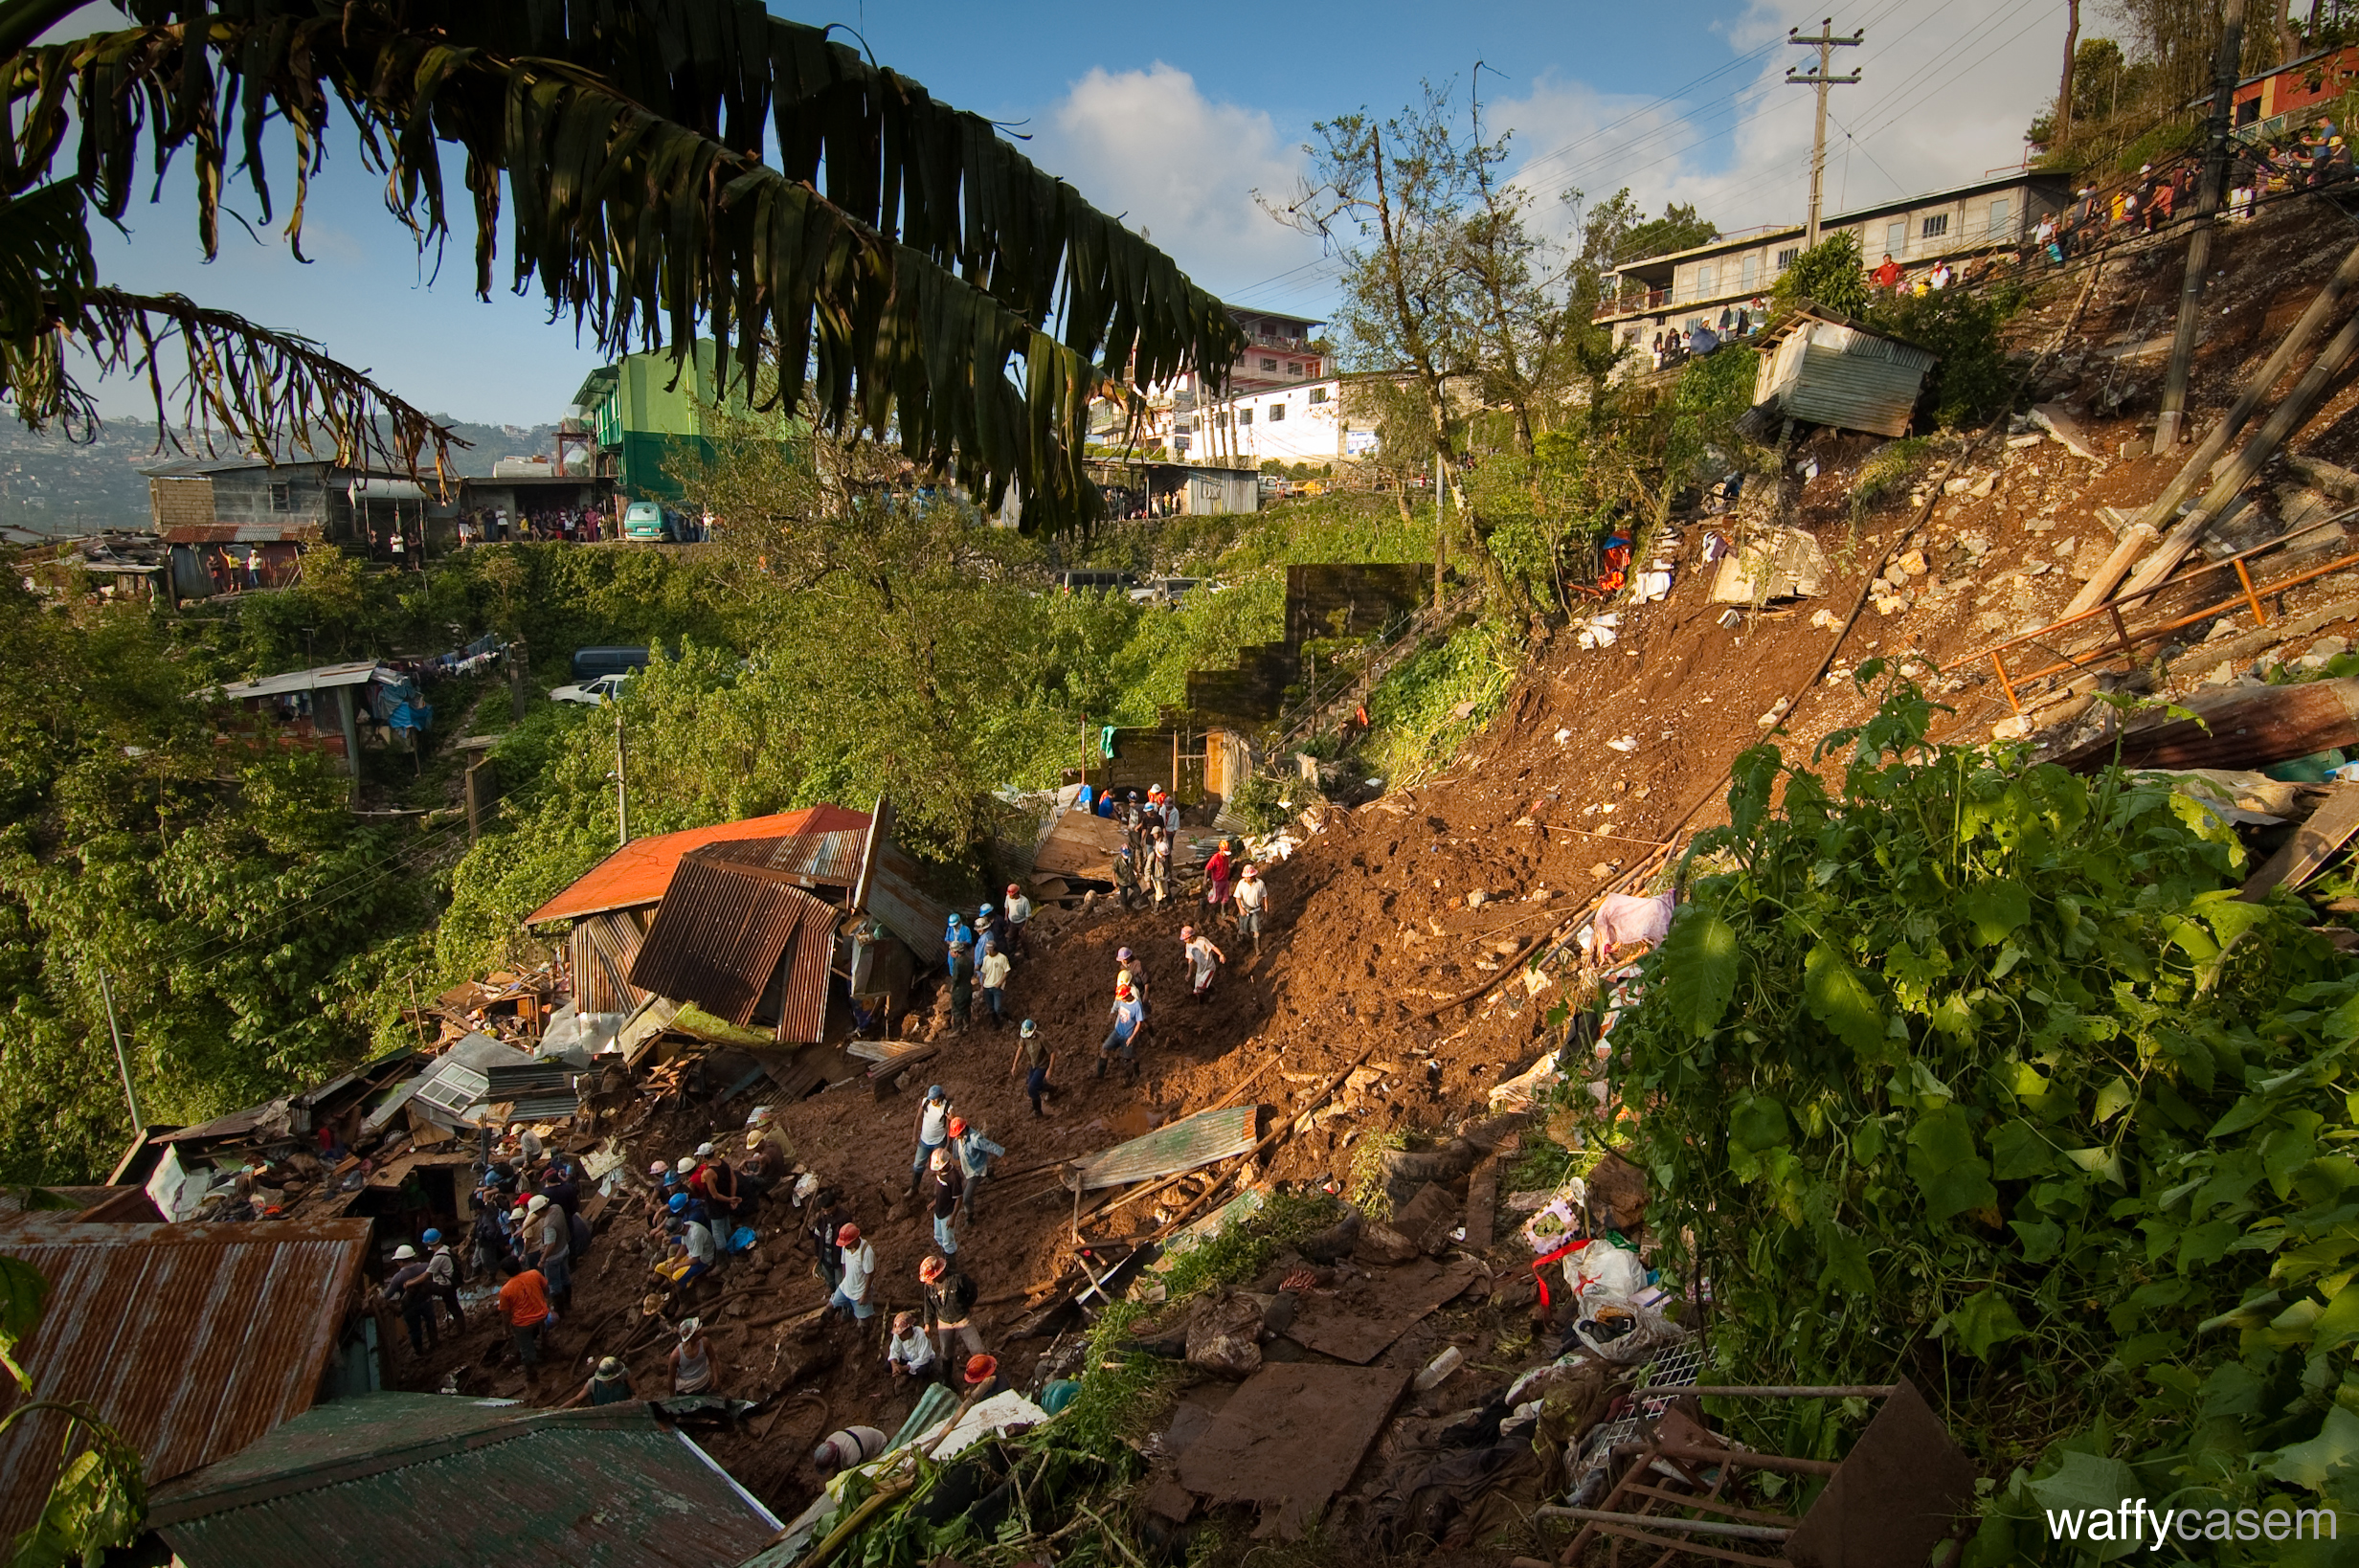 Rubble and workers in the wake of a devestating landslide in the Philippines